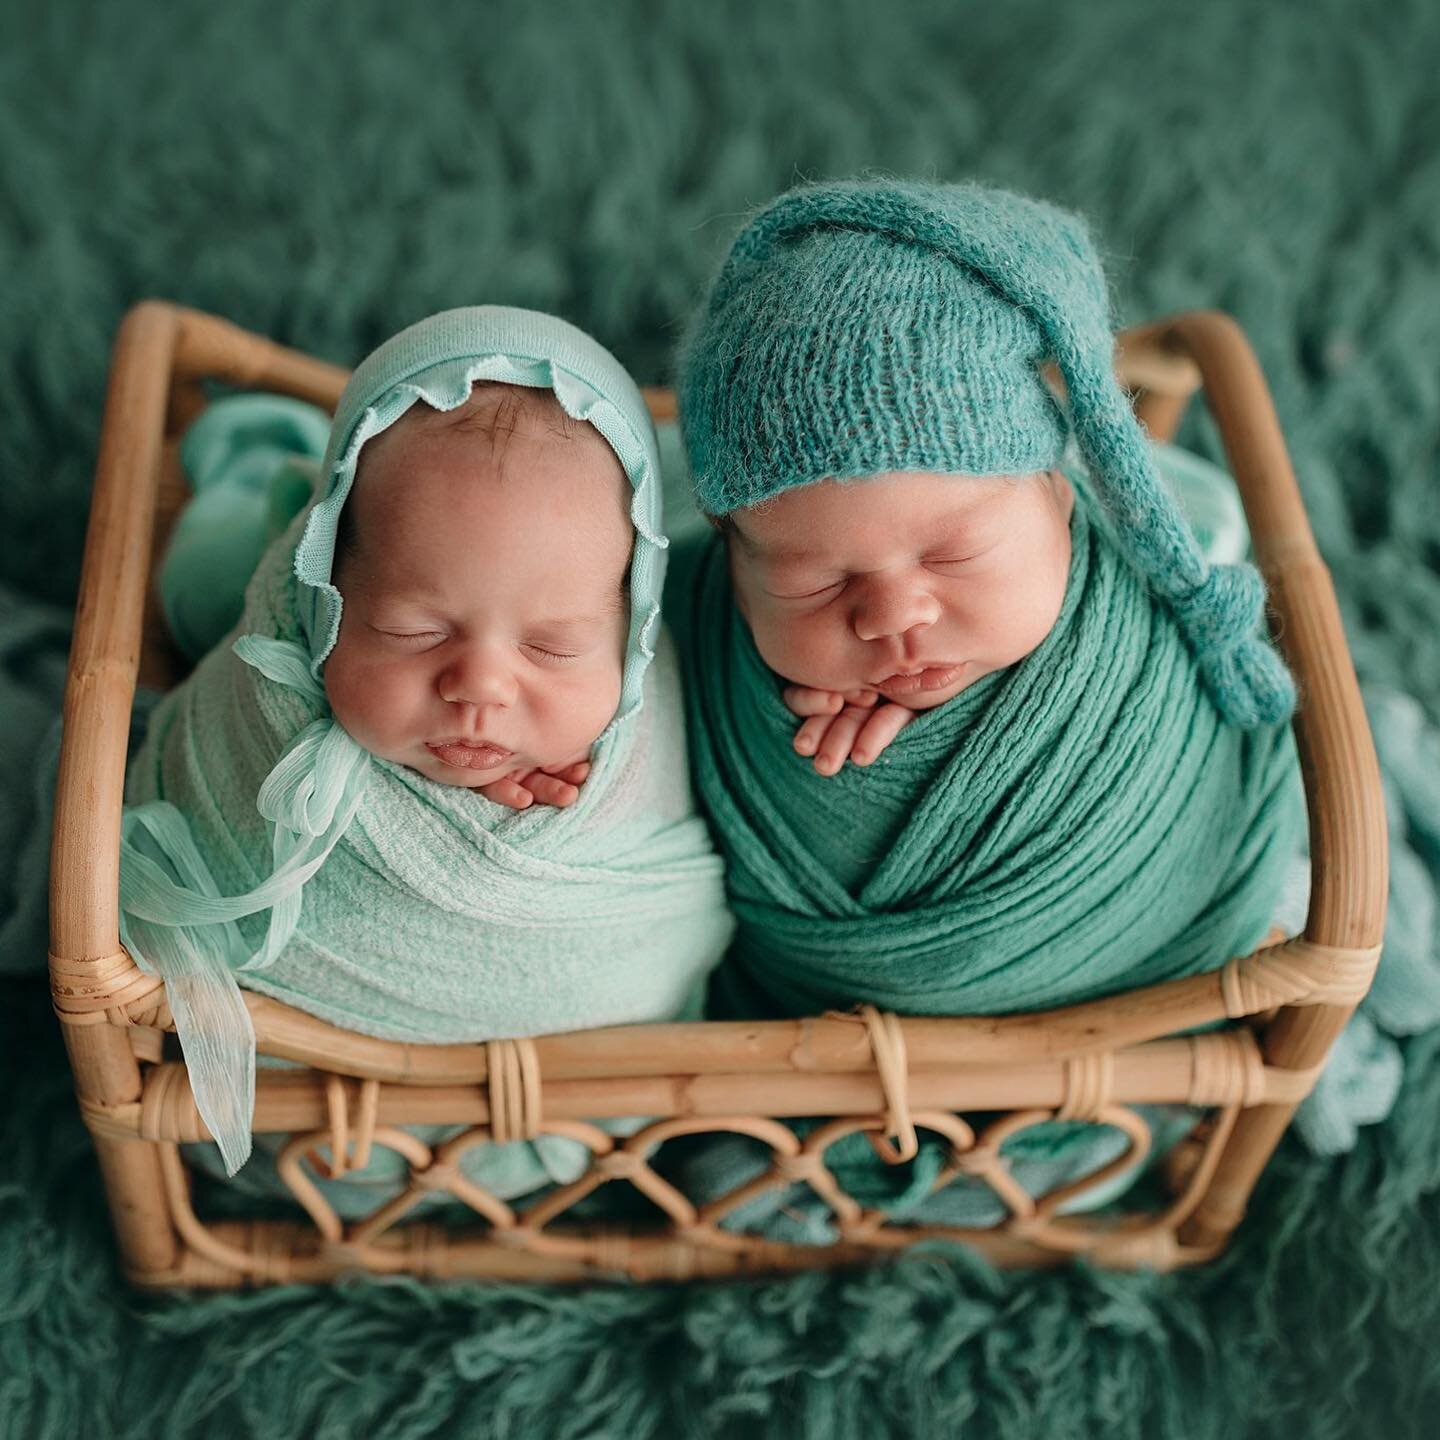 Proud Aunt to the cutest twins! We&rsquo;ve been excitedly waiting for you. Welcome to our world, Luke Michael &amp; Lyla Rae 💙💗
.
.
.
#twins #aunt #aunttotwins #twinsofinstagram #twopeasinapod #boygirltwins #twinnies #family #love